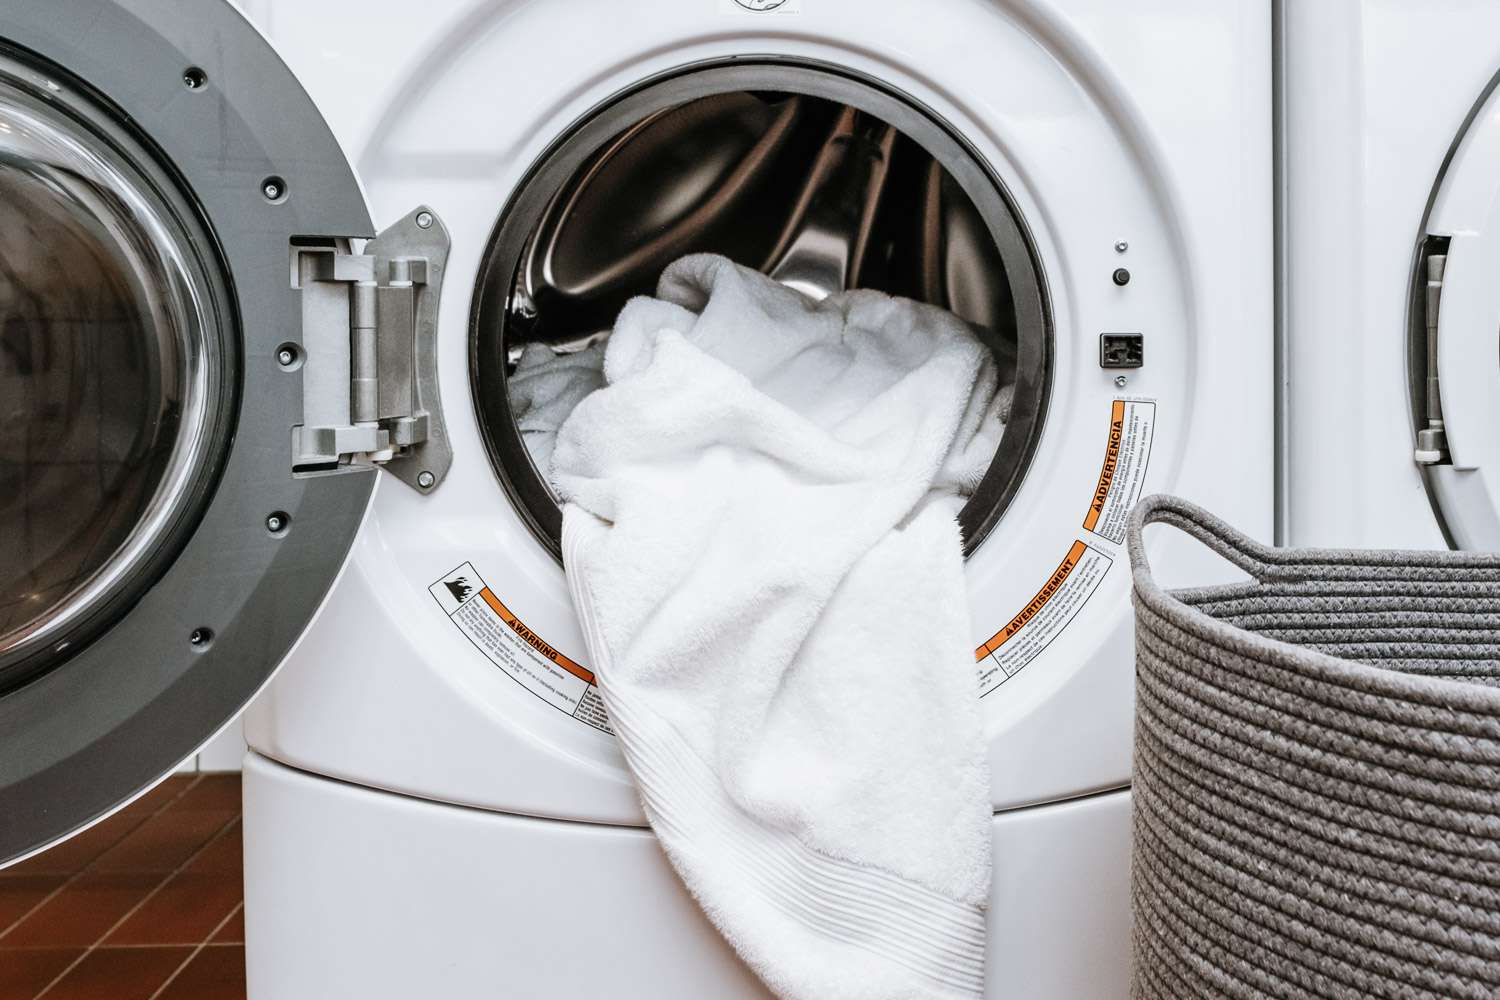 How To Maintain Your Front Loading Washer